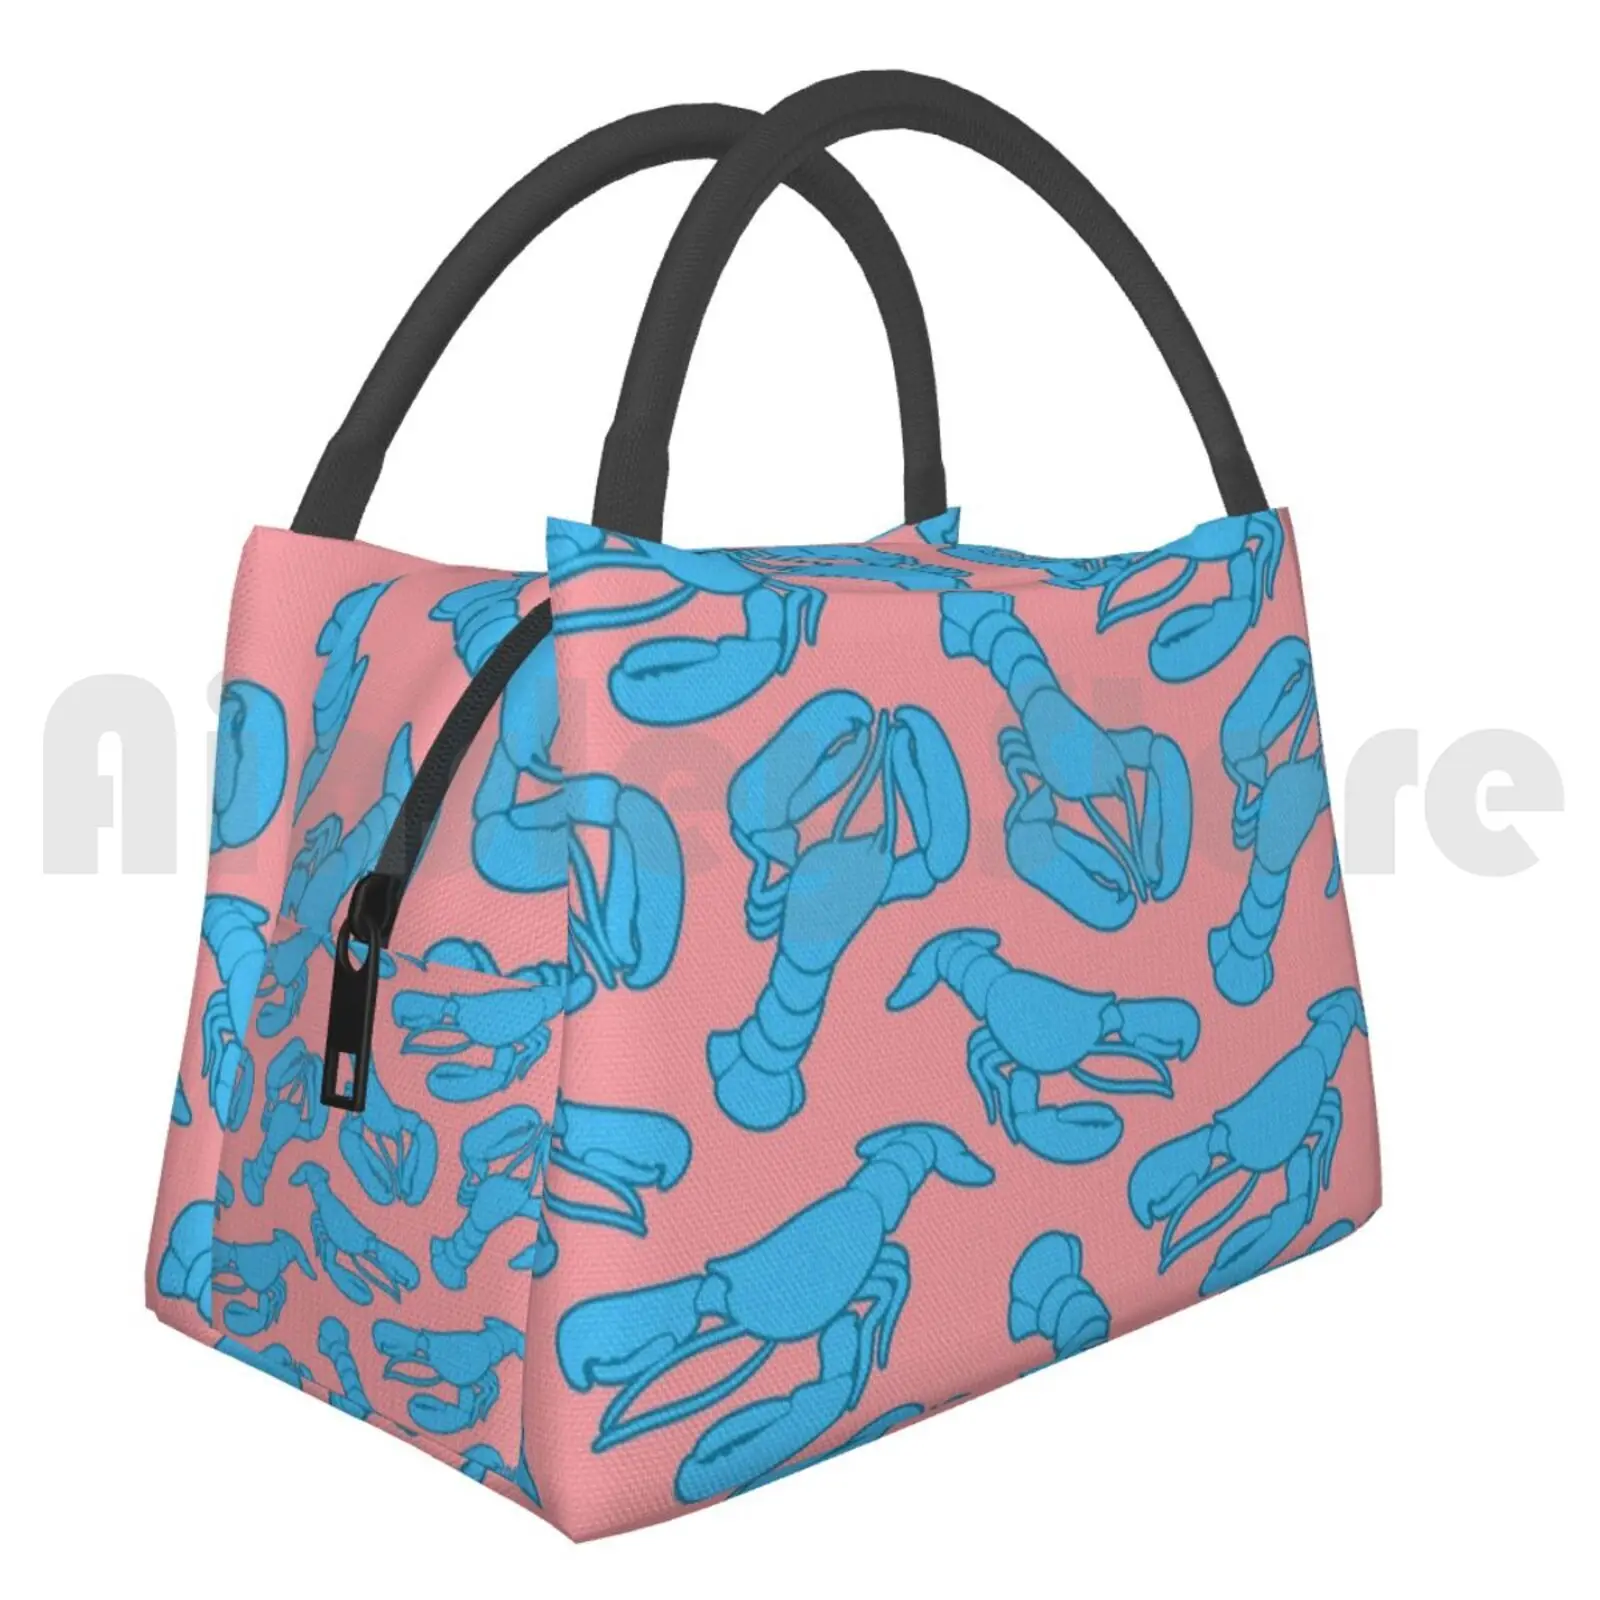 

Portable Insulation Bag Blue Lobsters On Dusty Pink. Lobster Dusty Dusty Pink Pink Pattern Seafood Food Sea